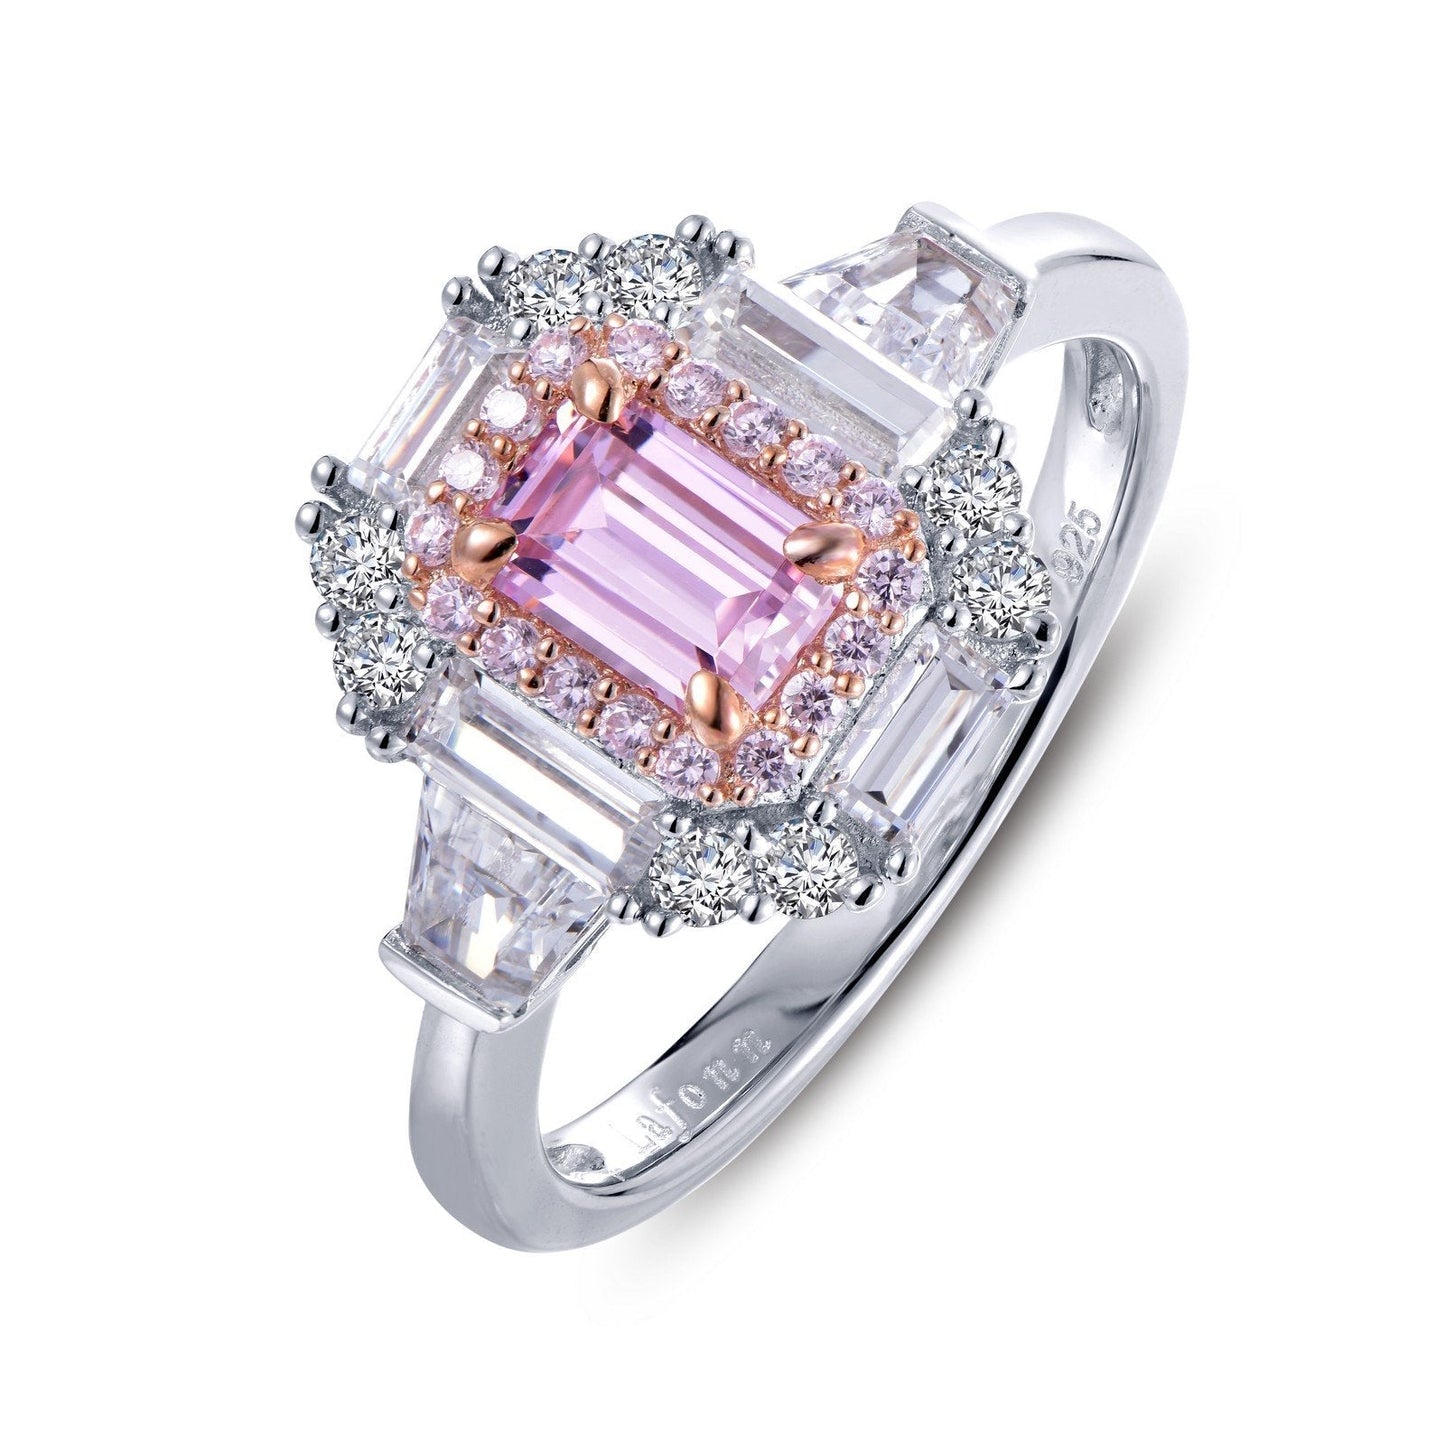 Lafonn Baguette Halo Engagement Ring PINK RINGS Size 7 Platinum 1.6 CTS Approx.12.5(H)*10.5(W)